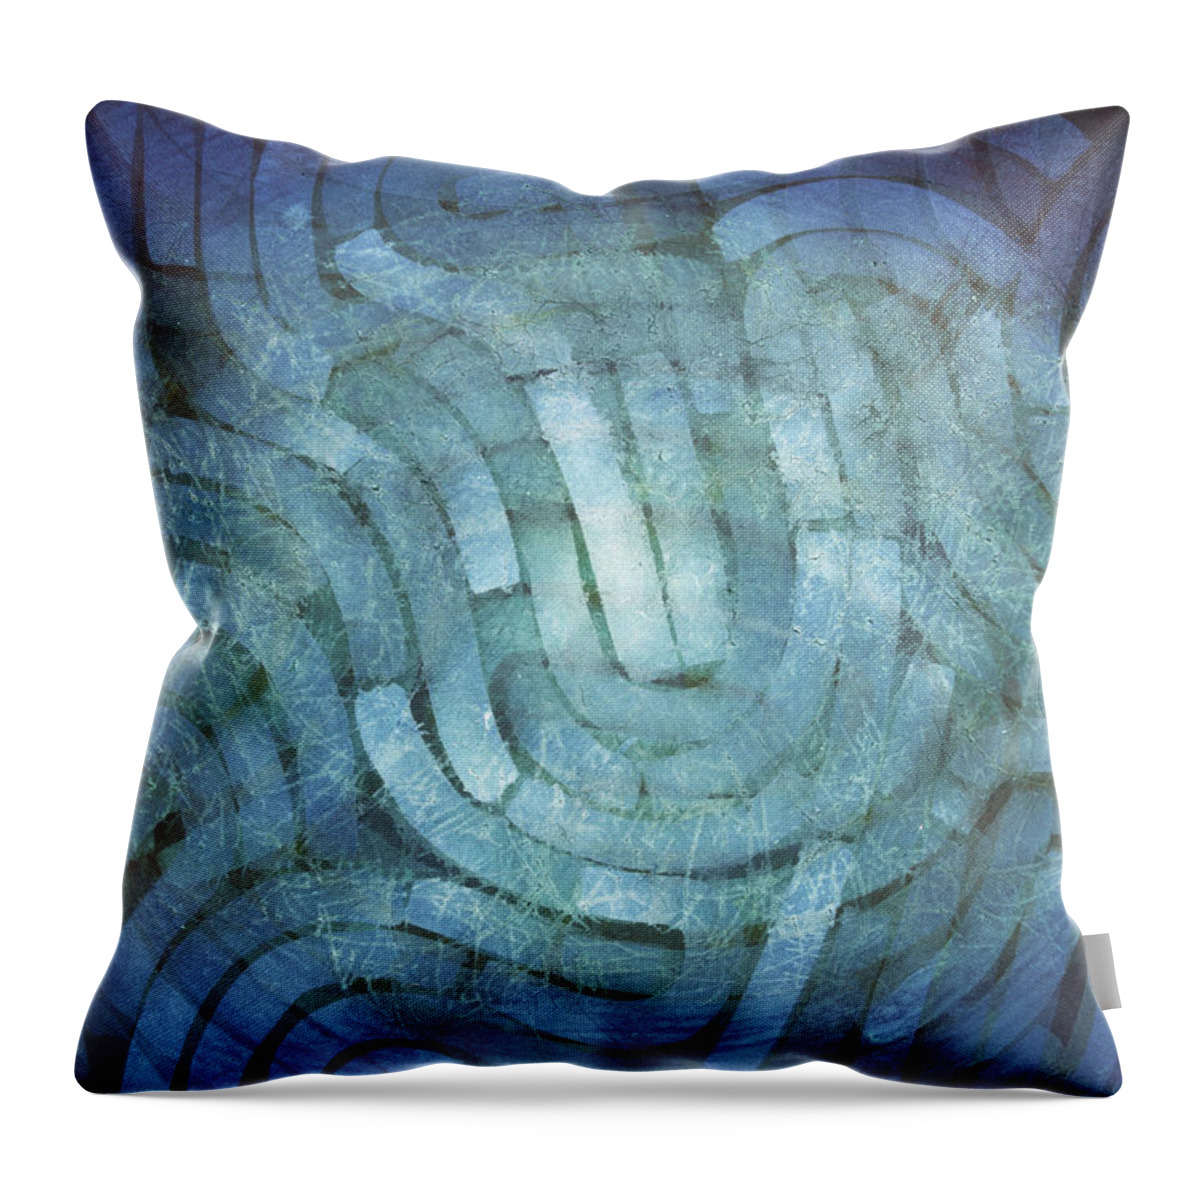 Watercolour Throw Pillow featuring the painting Careful Where You Stand two returned by Petra Rau